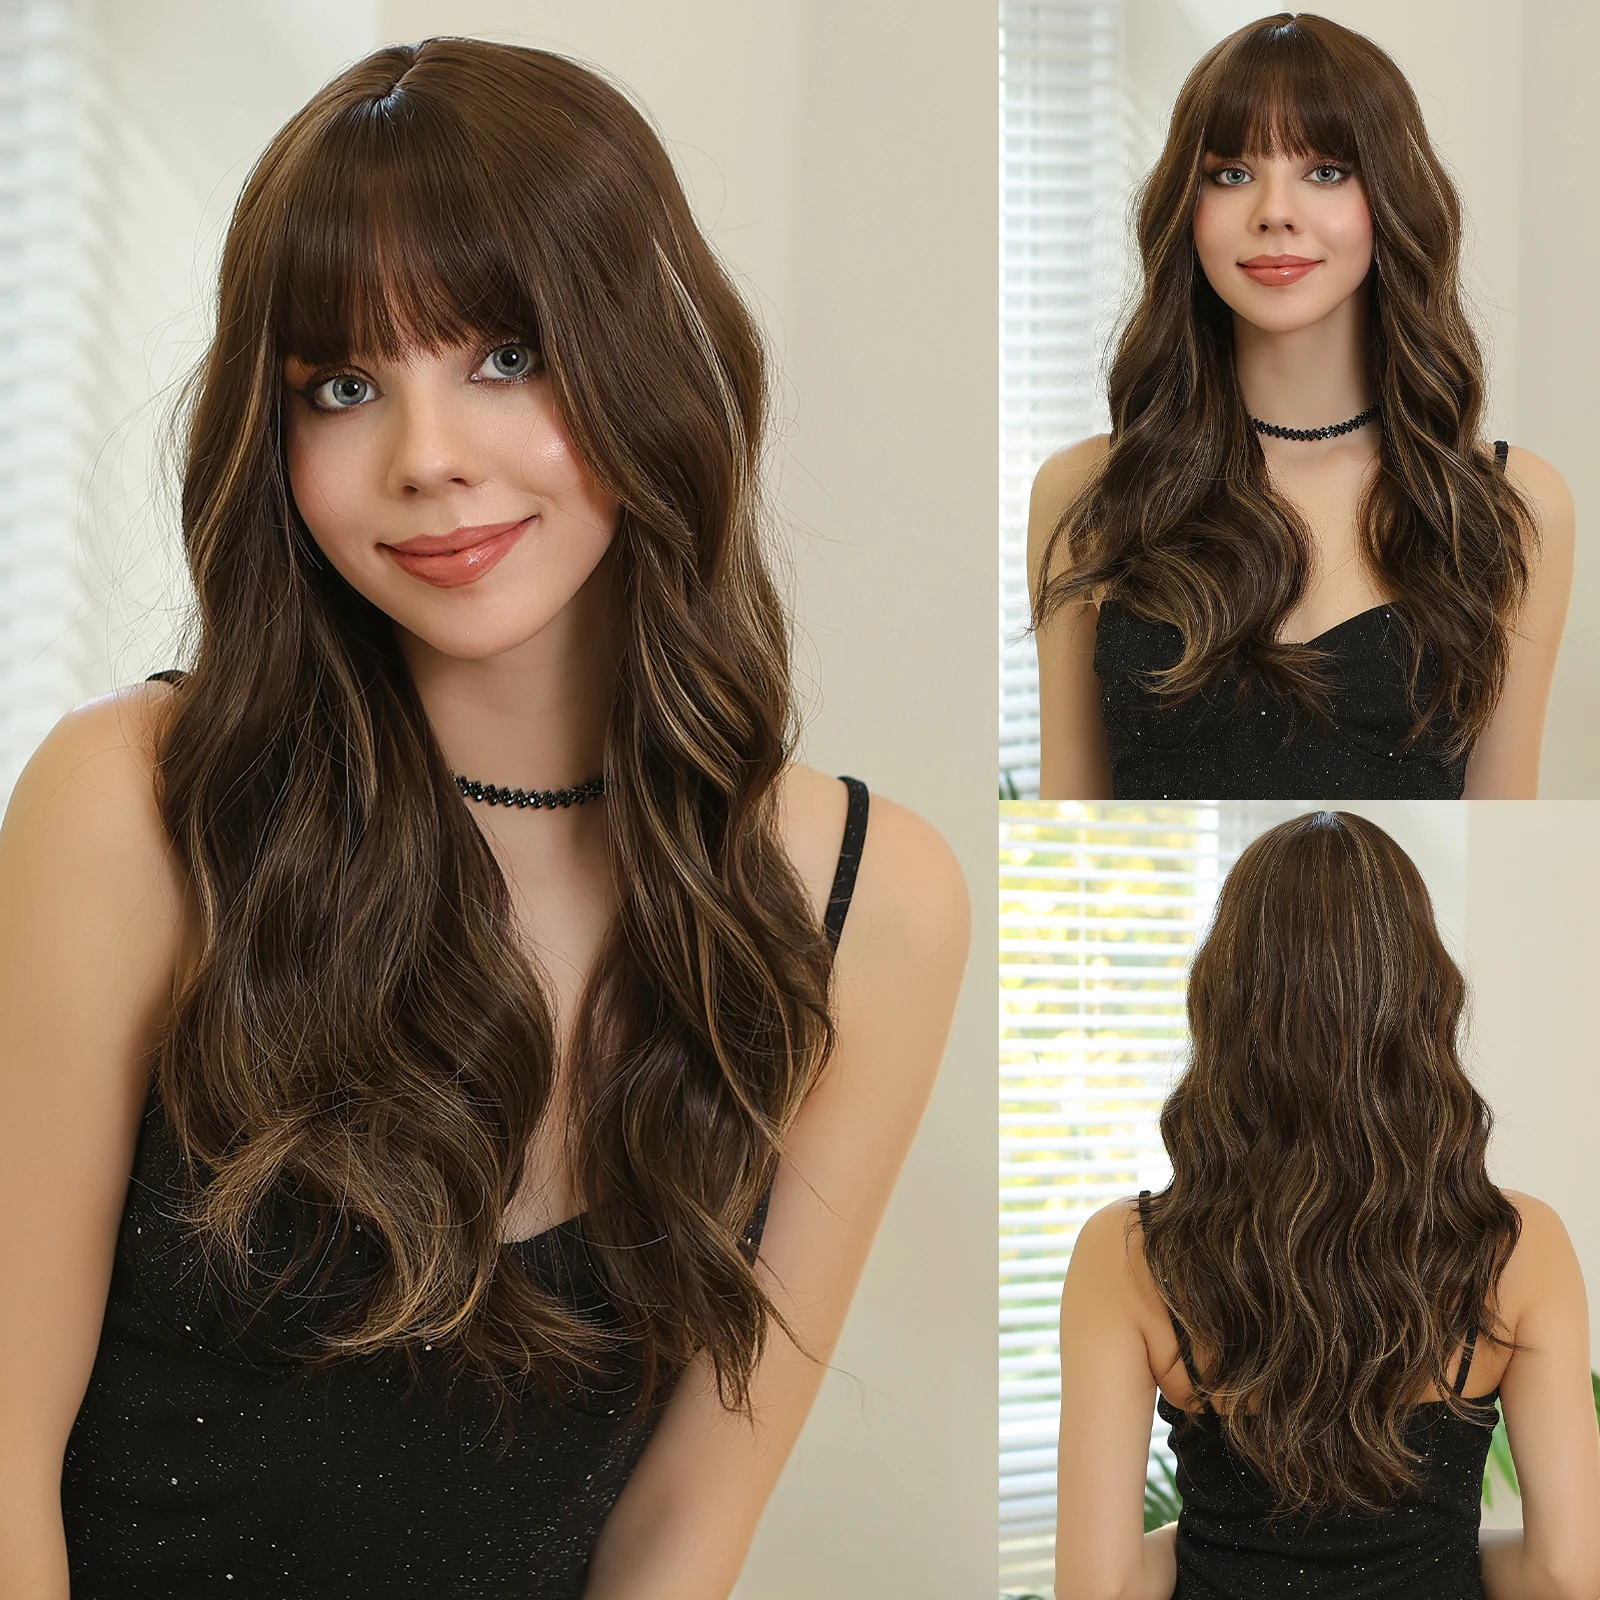 

EASIHAIR Long Loose Wave Synthetic Hair Wigs With Bangs Brown Wave Wigs with Golden Highlights for Women Daily Heat Resistant